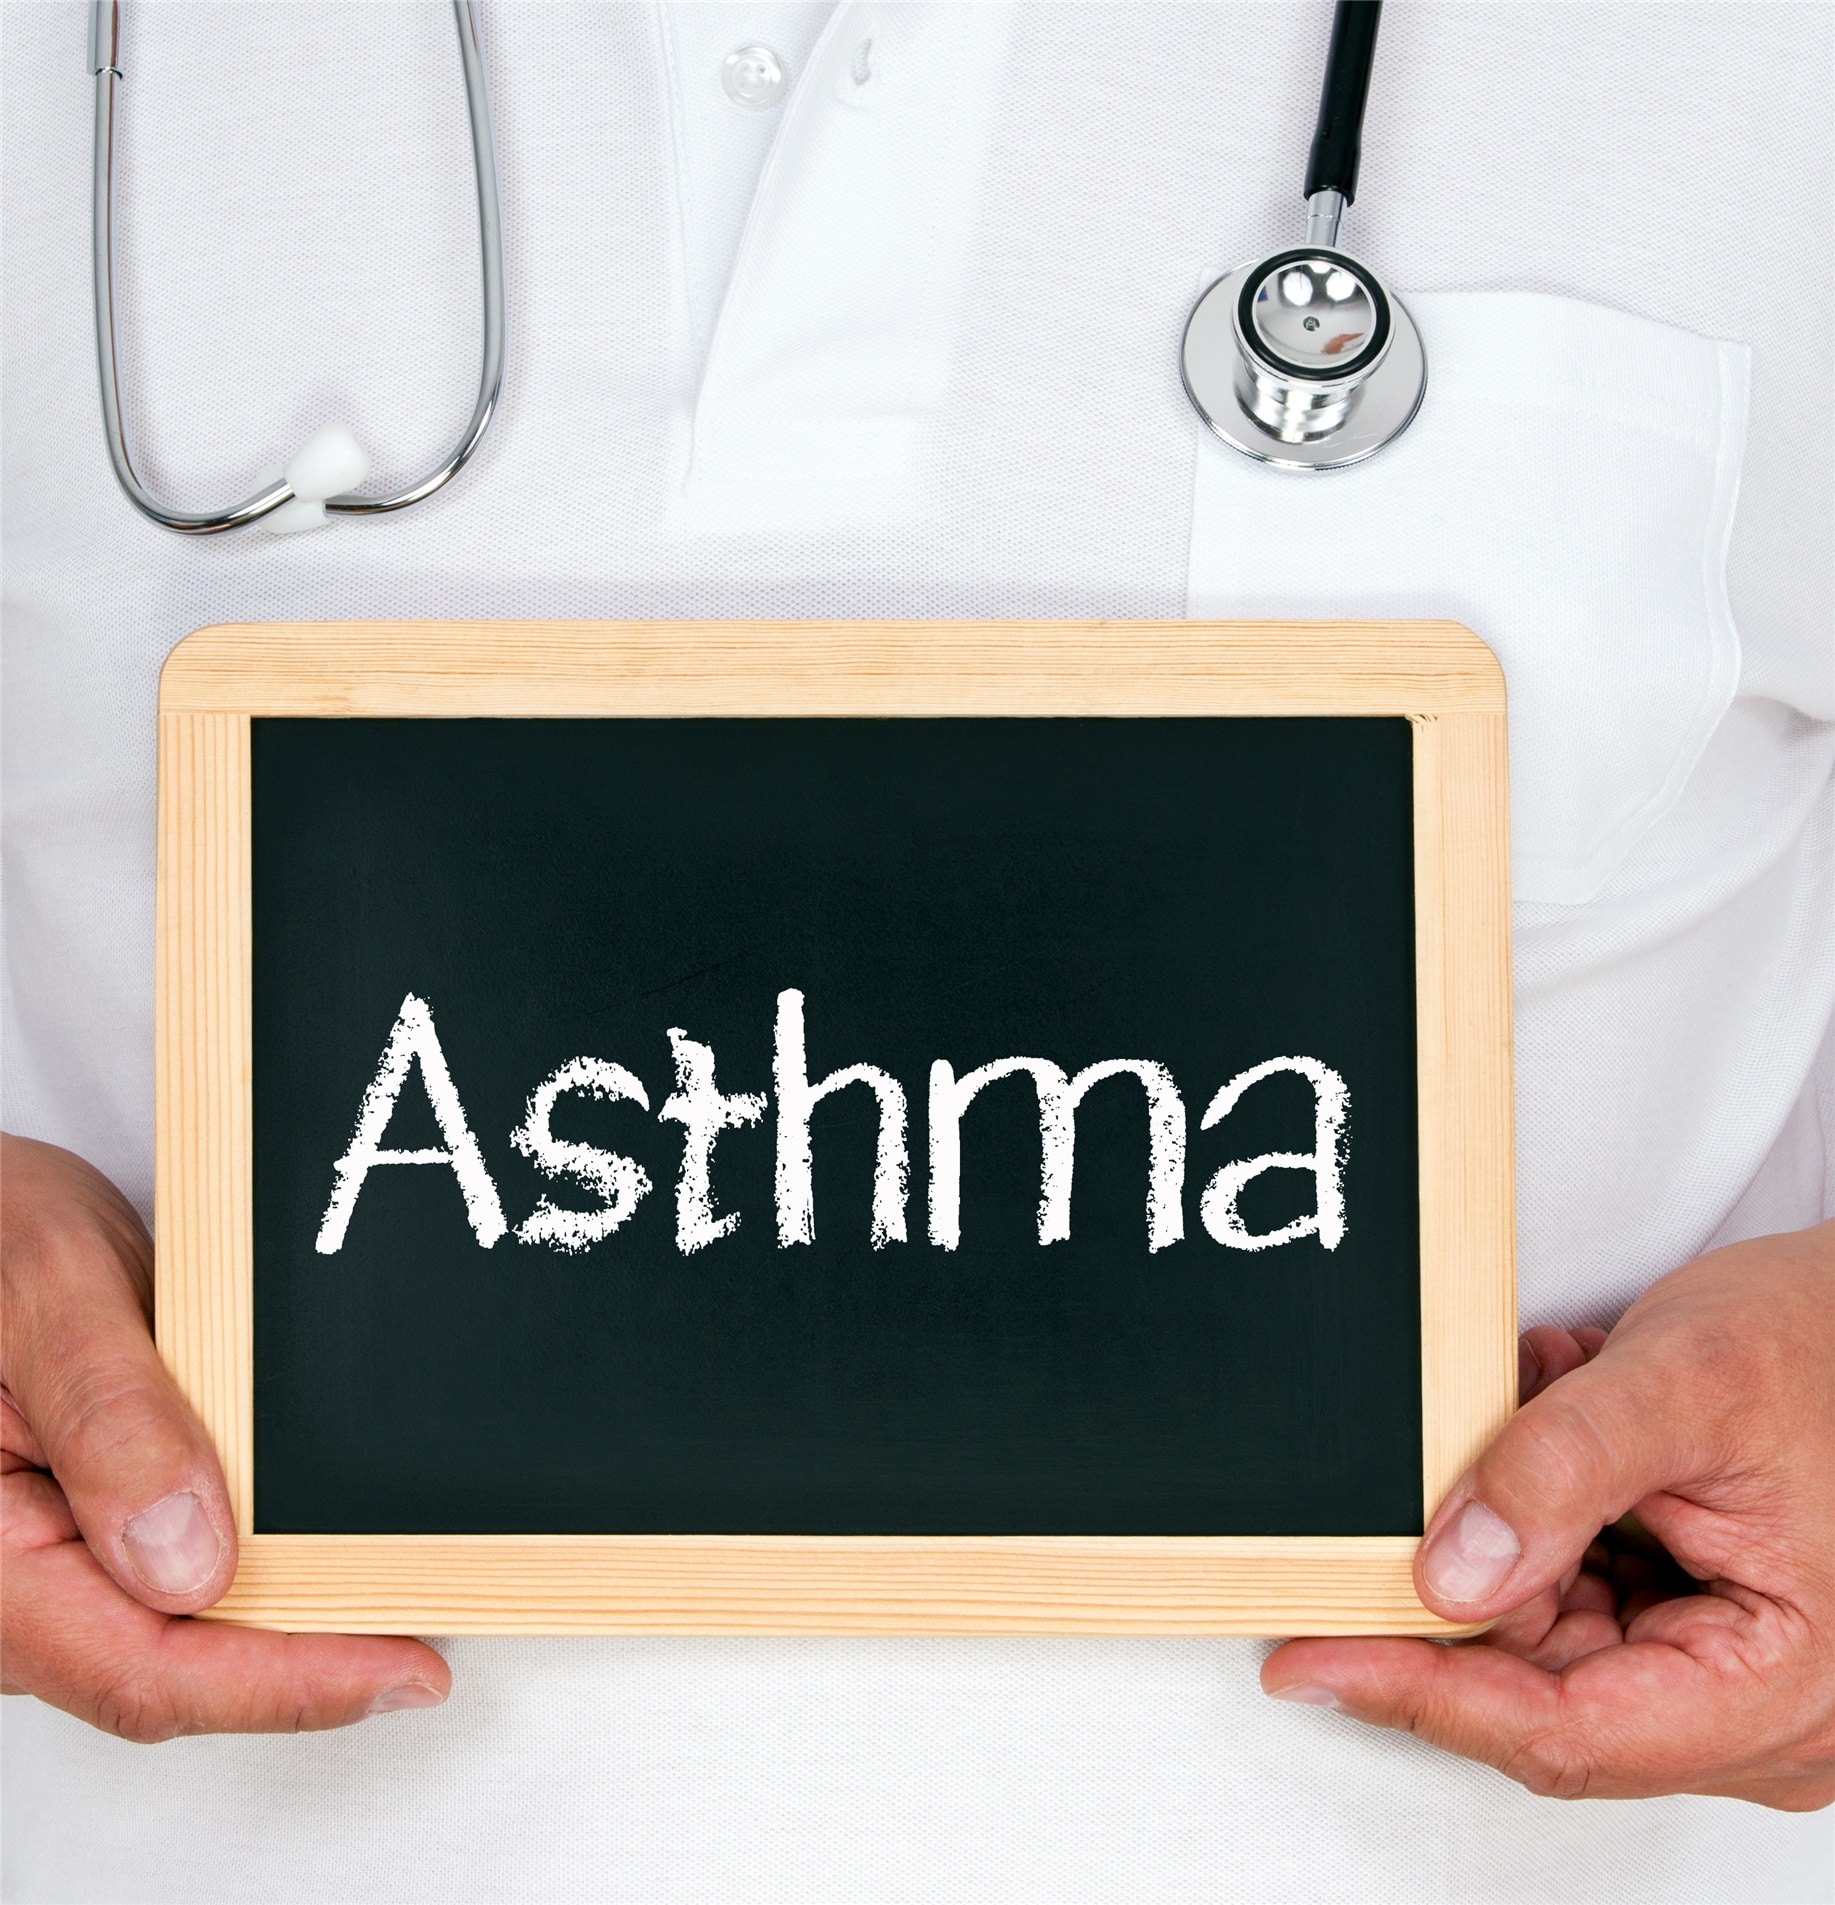 Will I have trouble getting life insurance with asthma?